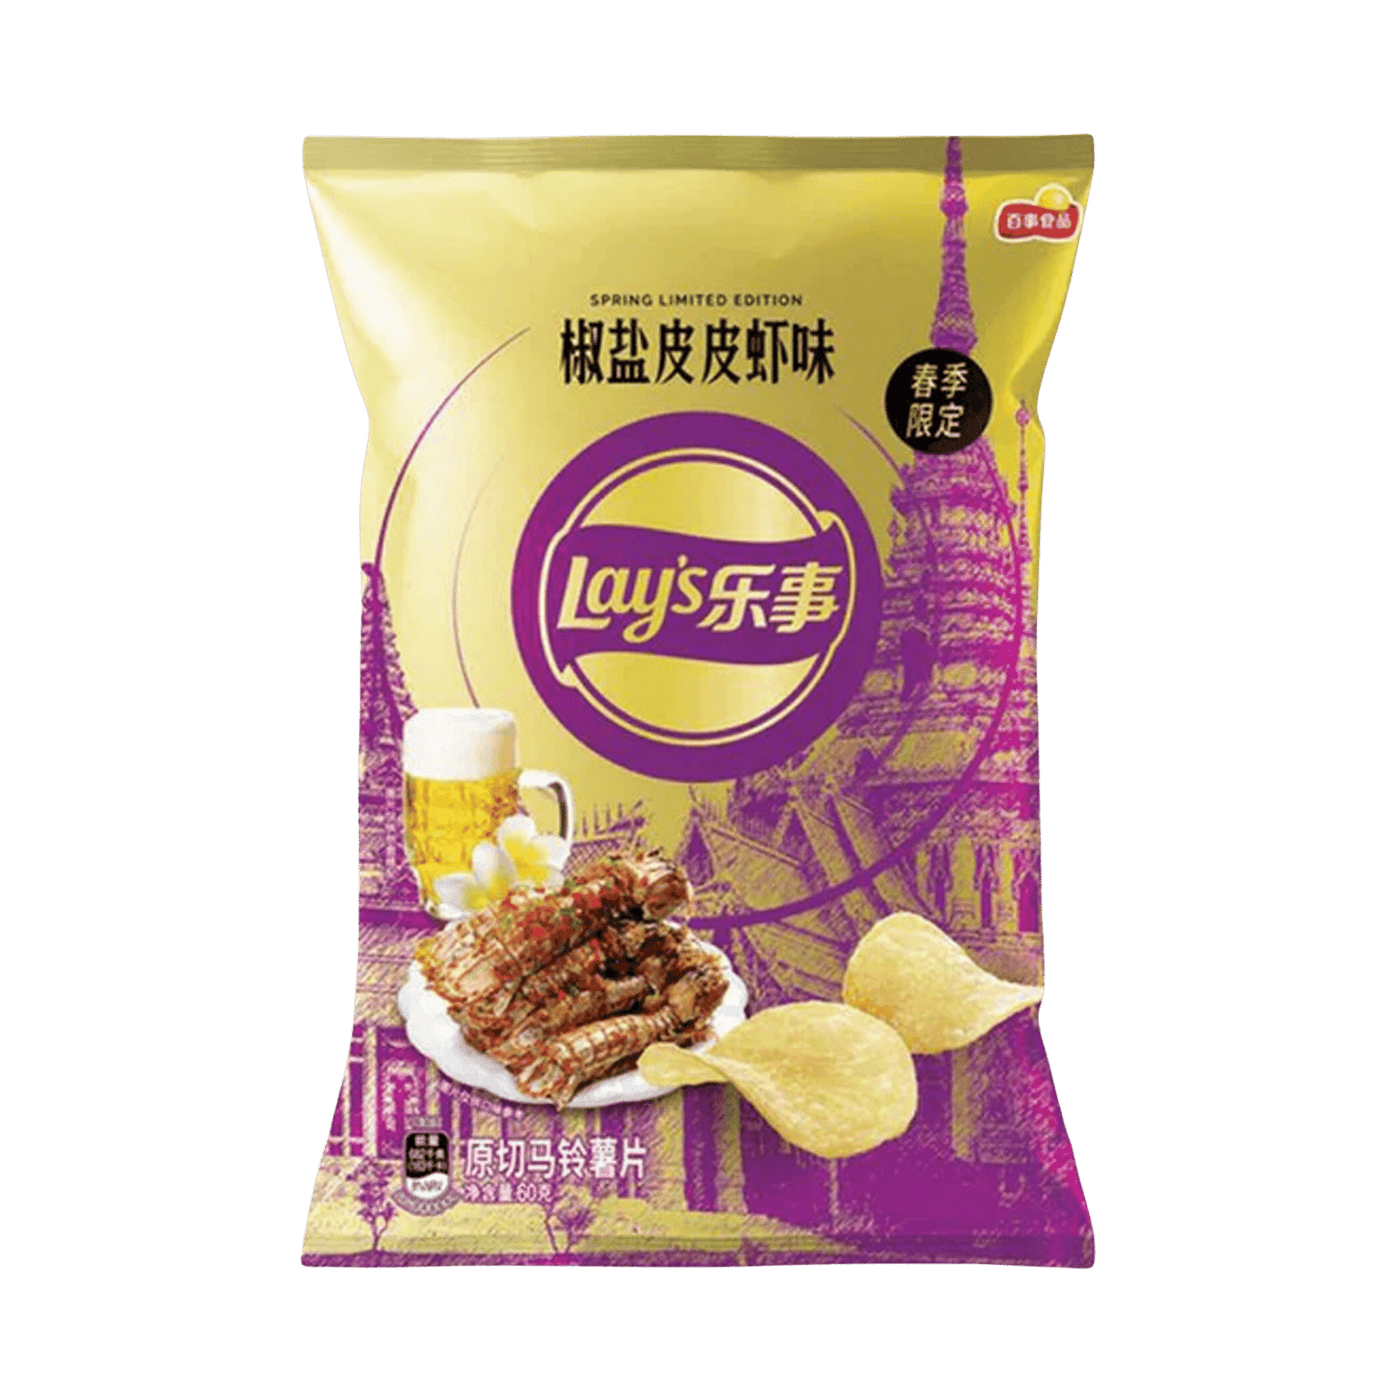 Lay's - Edition limitée - Asie